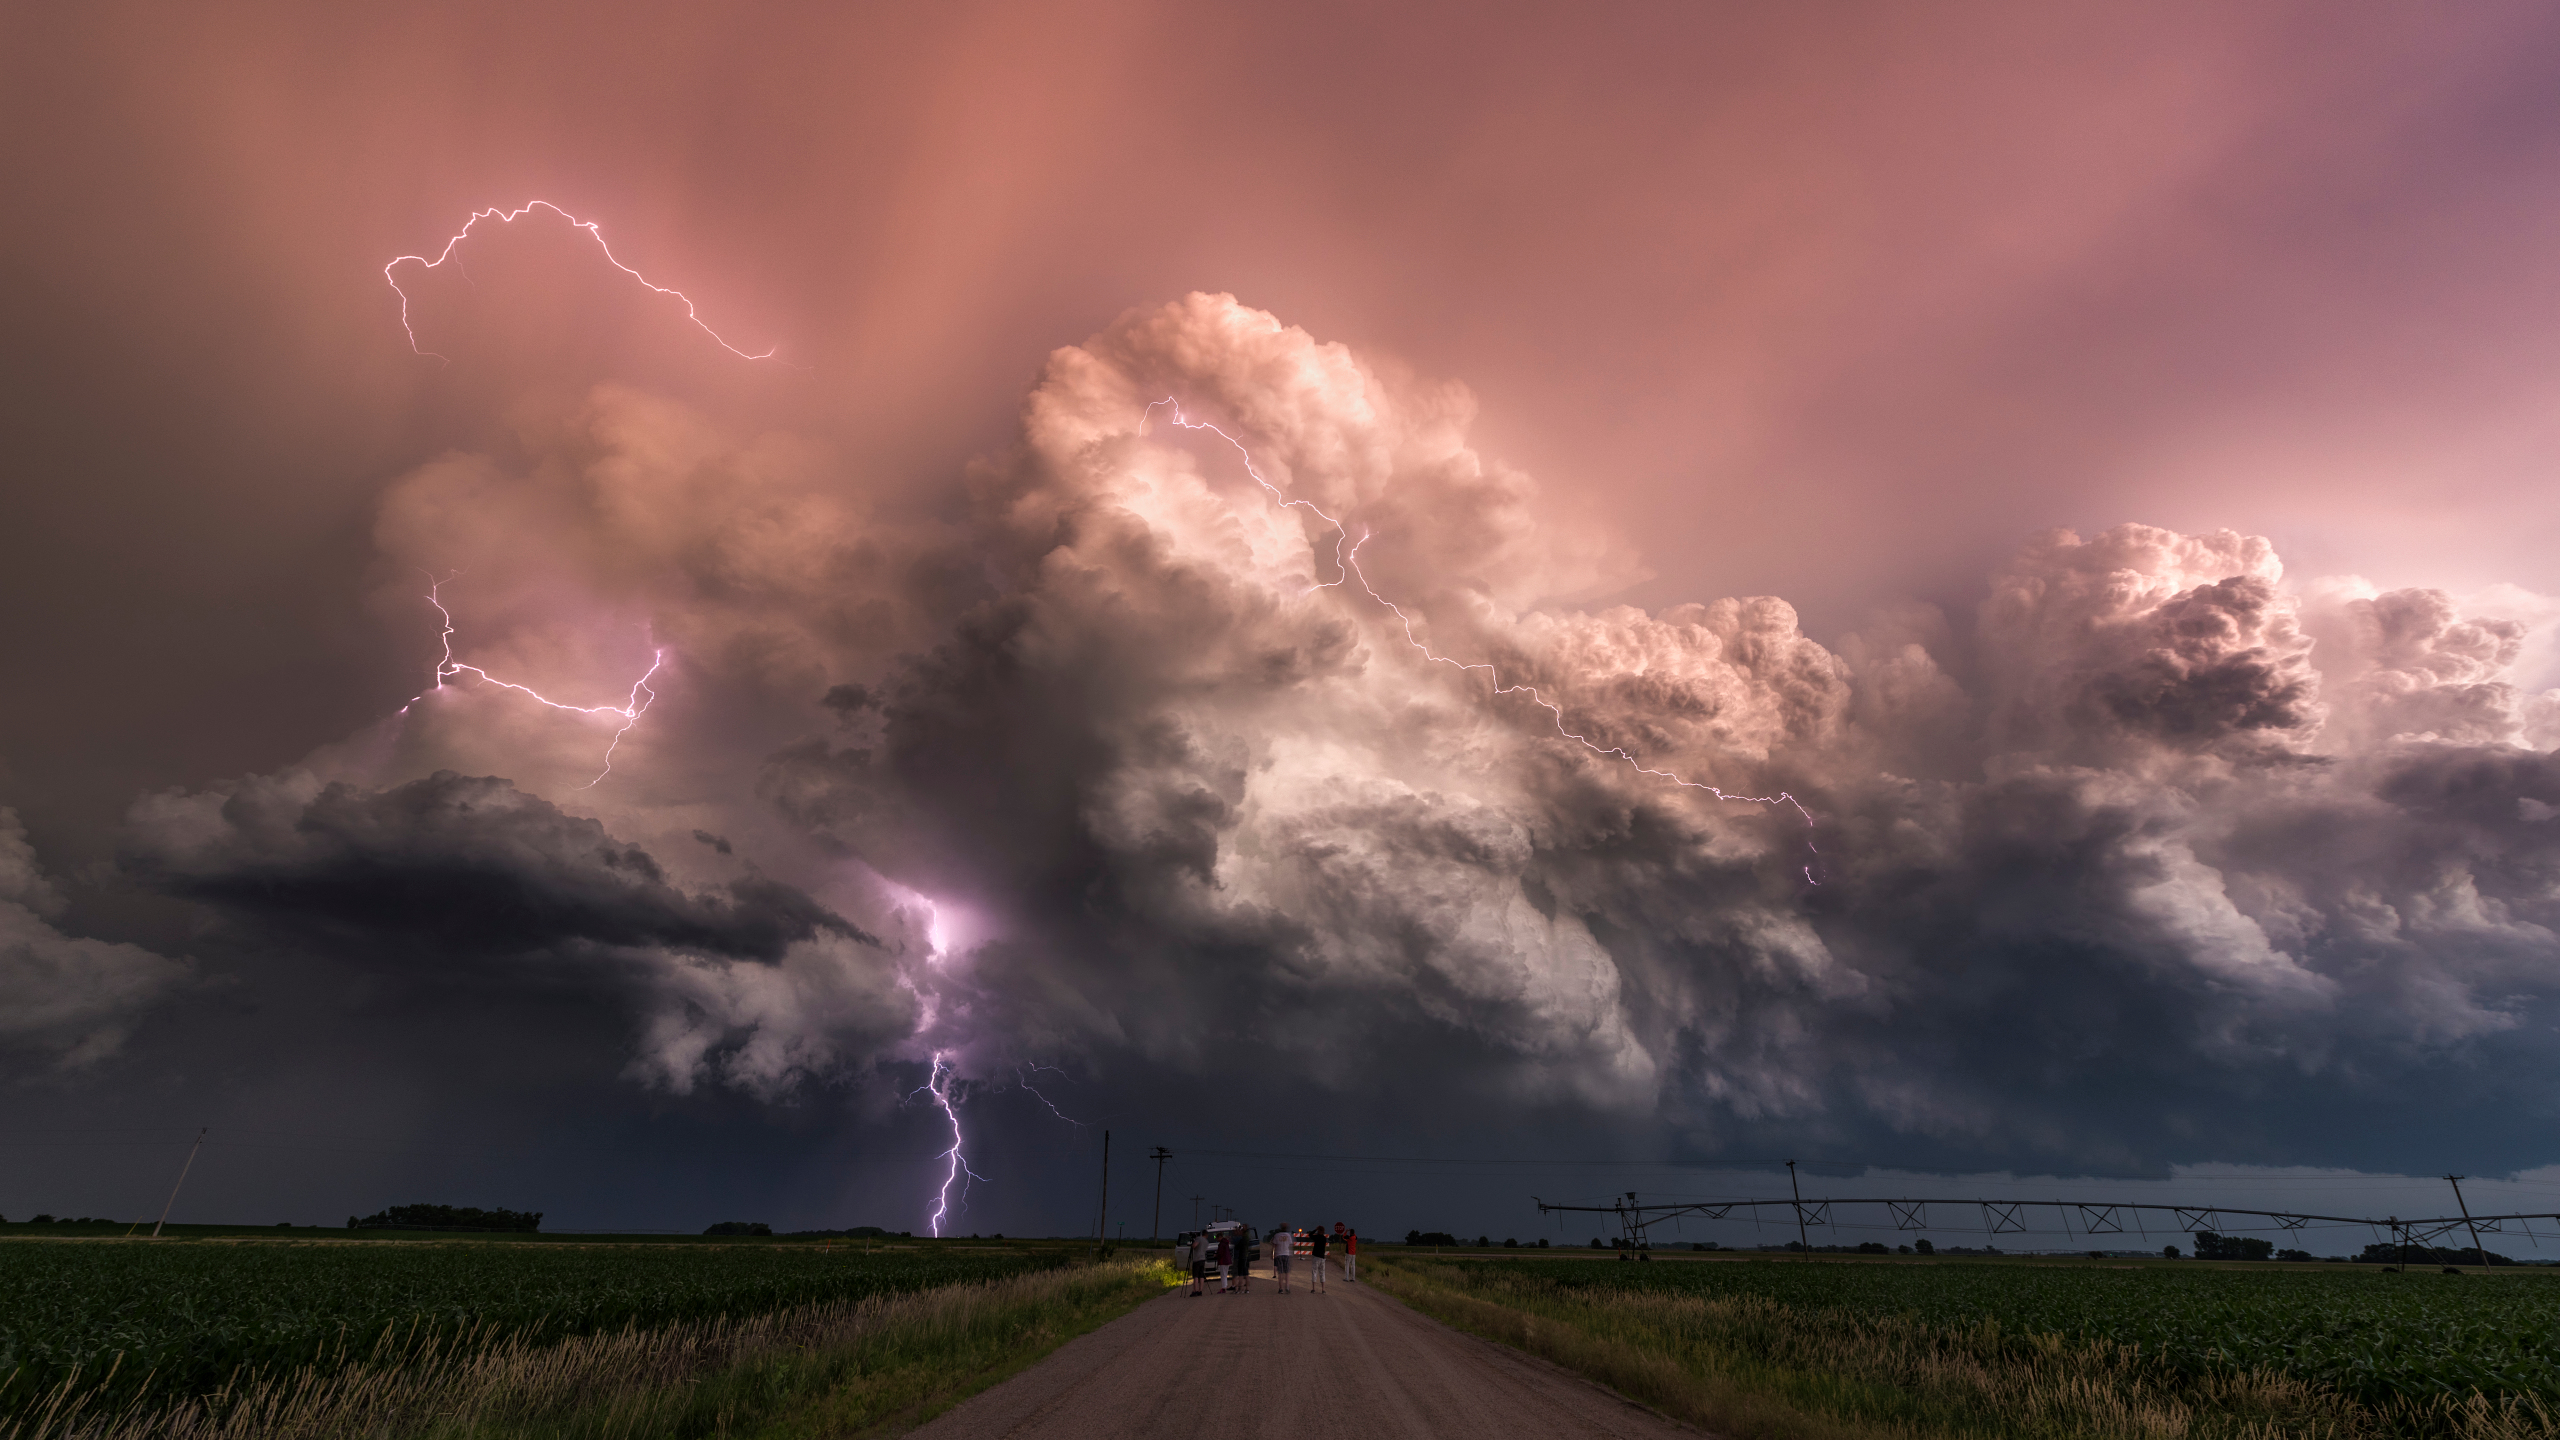 Storm Nature Clouds Lightning Sky People Long Exposure Time Lapse Dirt Road Field 2560x1440